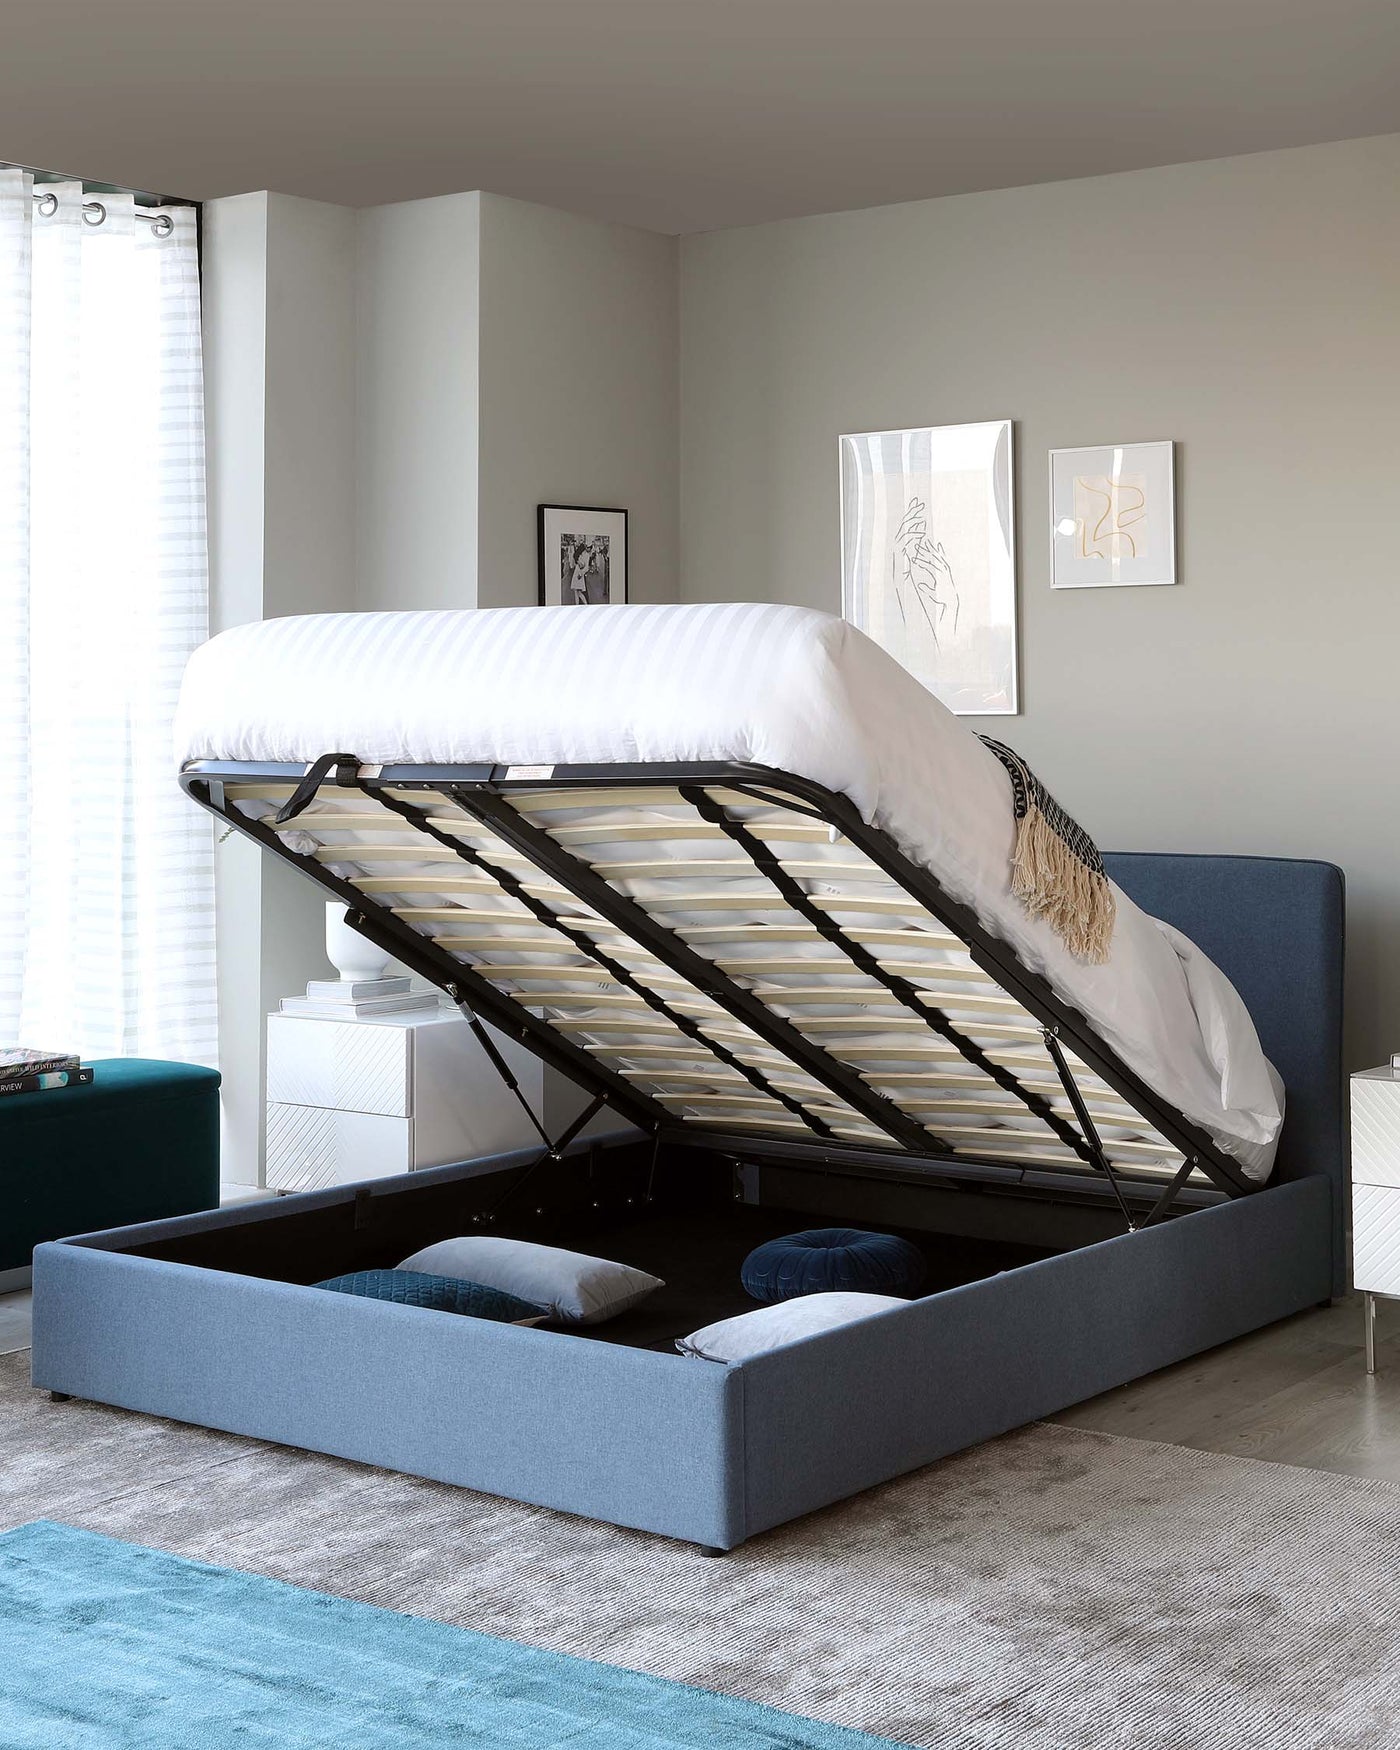 Modern upholstered platform bed with an easy-lift hydraulic system revealing under-bed storage, supported by a slatted base, set in a cosy bedroom with minimalist decor.